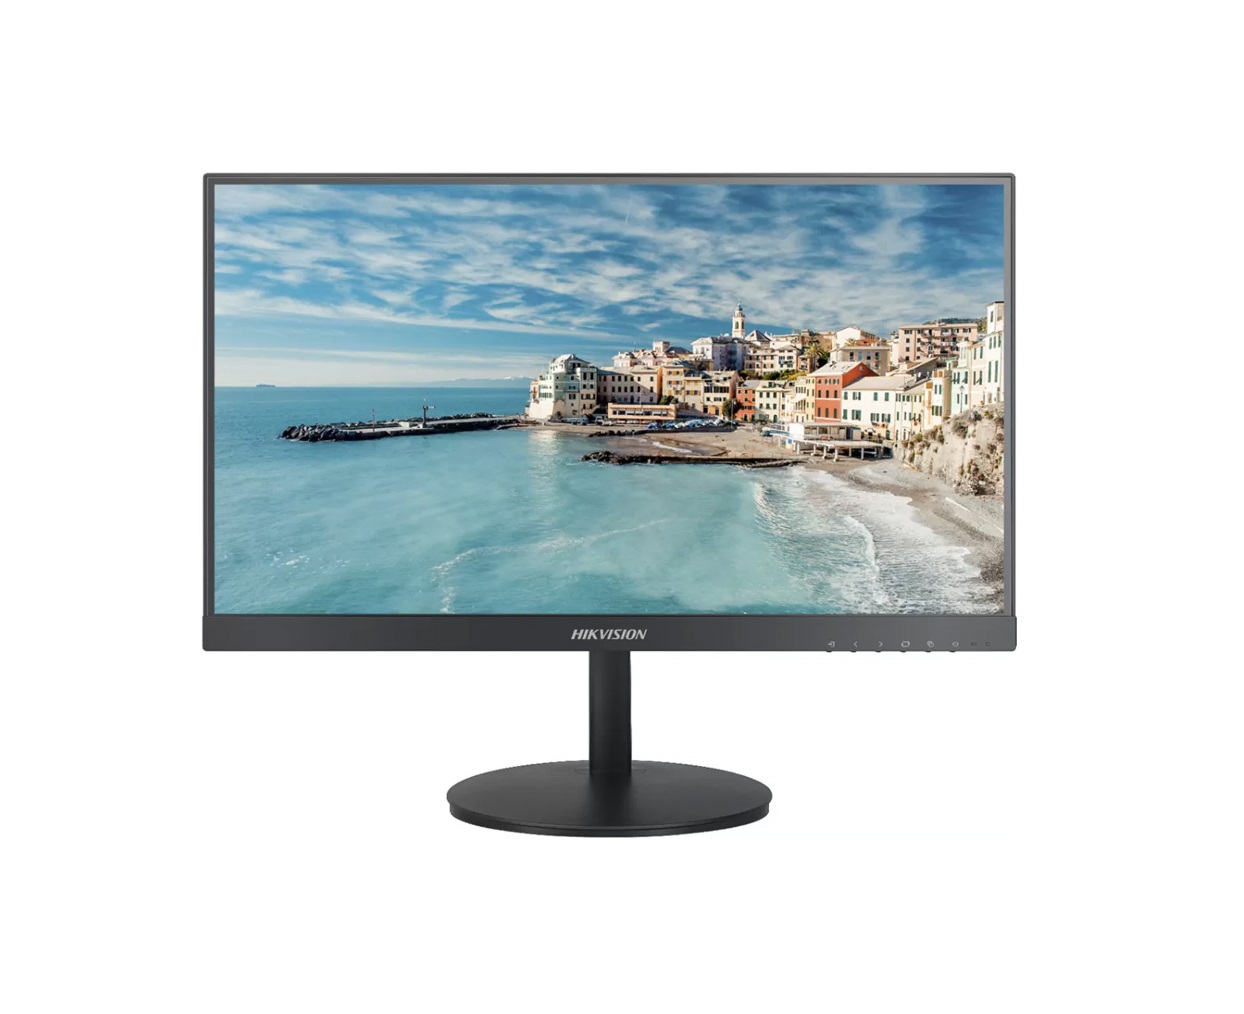 Hikvision DS-D5022FN-C 21.5inch Monitor